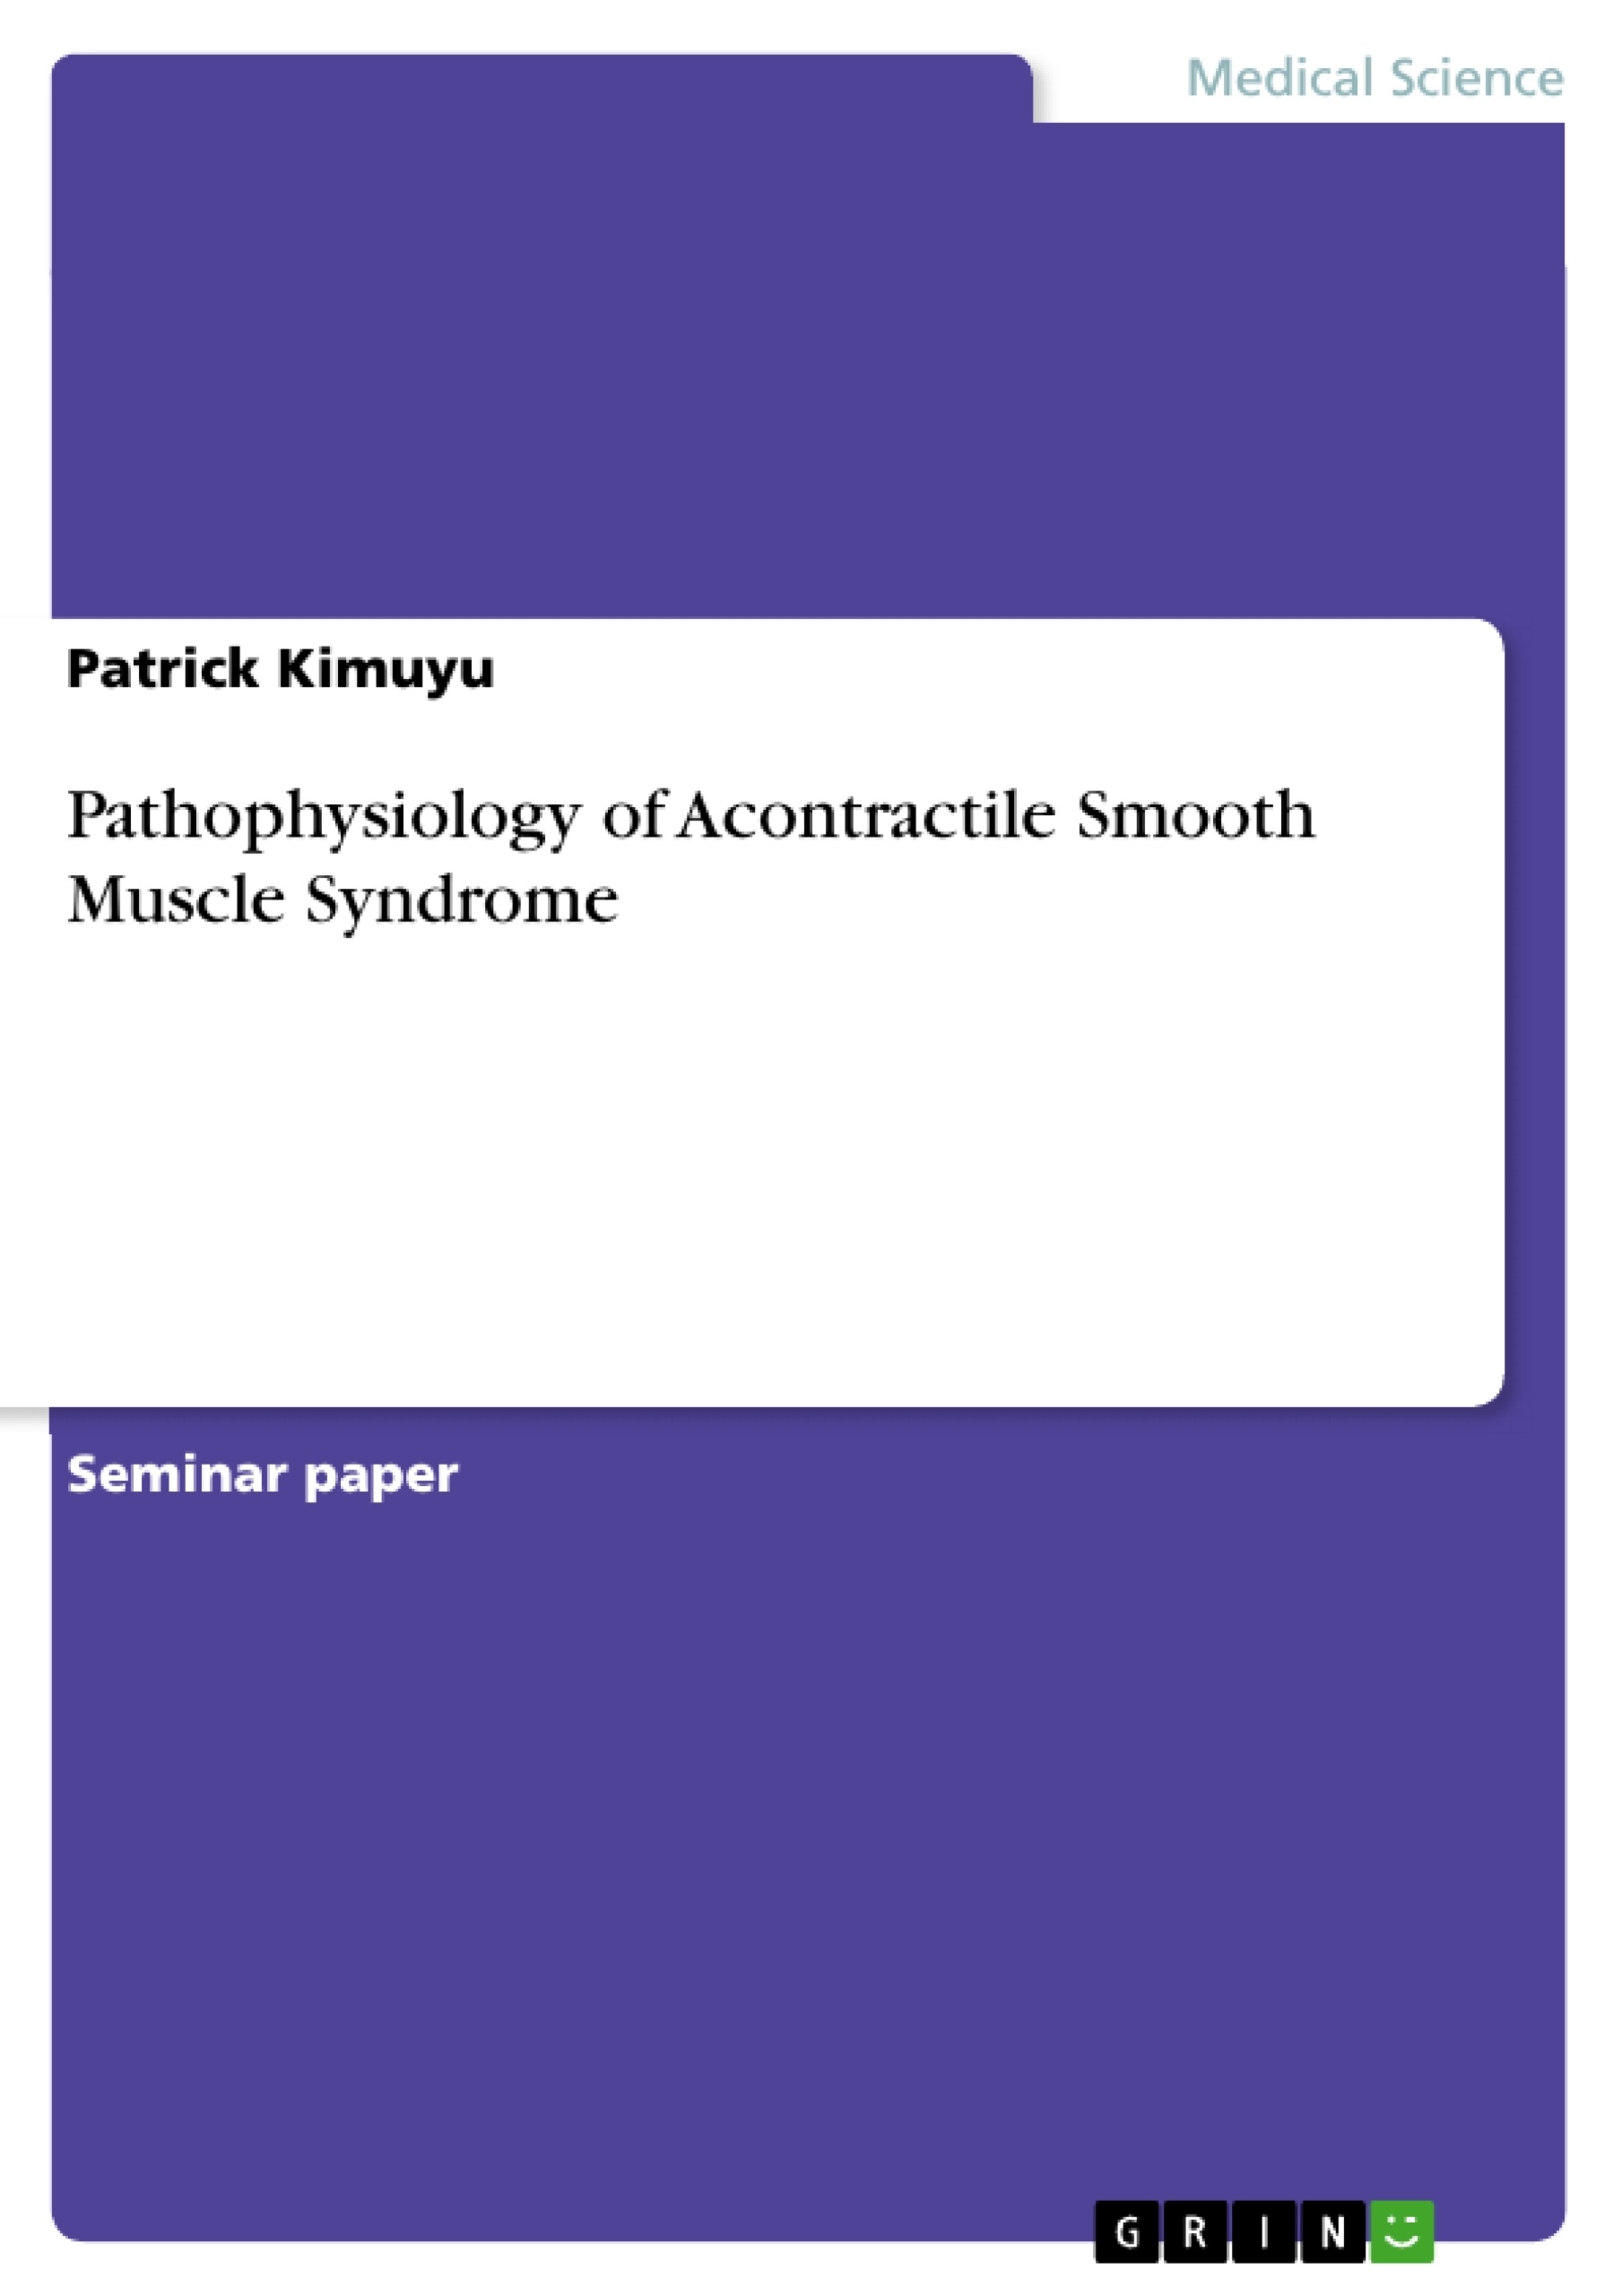 Título: Pathophysiology of Acontractile Smooth Muscle Syndrome